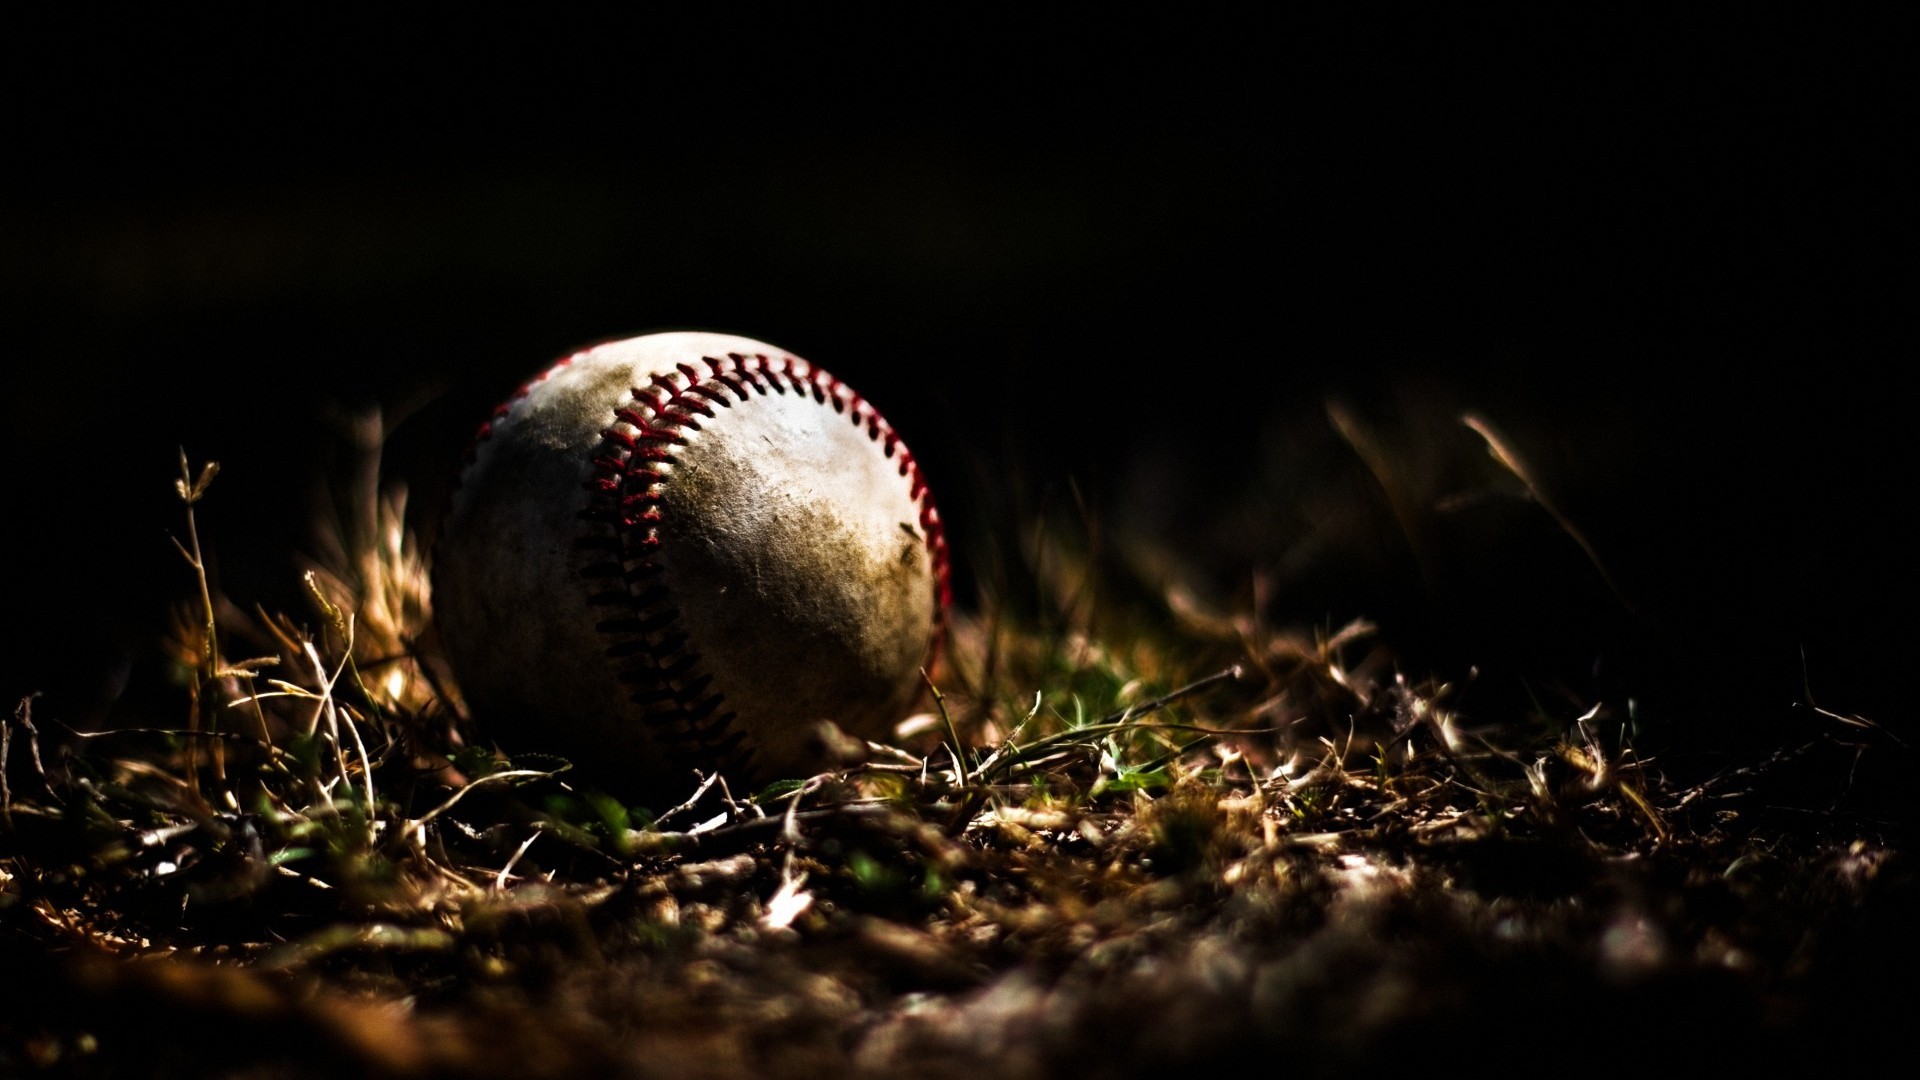 Baseball Laptop Wallpaper with high-resolution 1920x1080 pixel. You can use this wallpaper for Mac Desktop Wallpaper, Laptop Screensavers, Android Wallpapers, Tablet or iPhone Home Screen and another mobile phone device